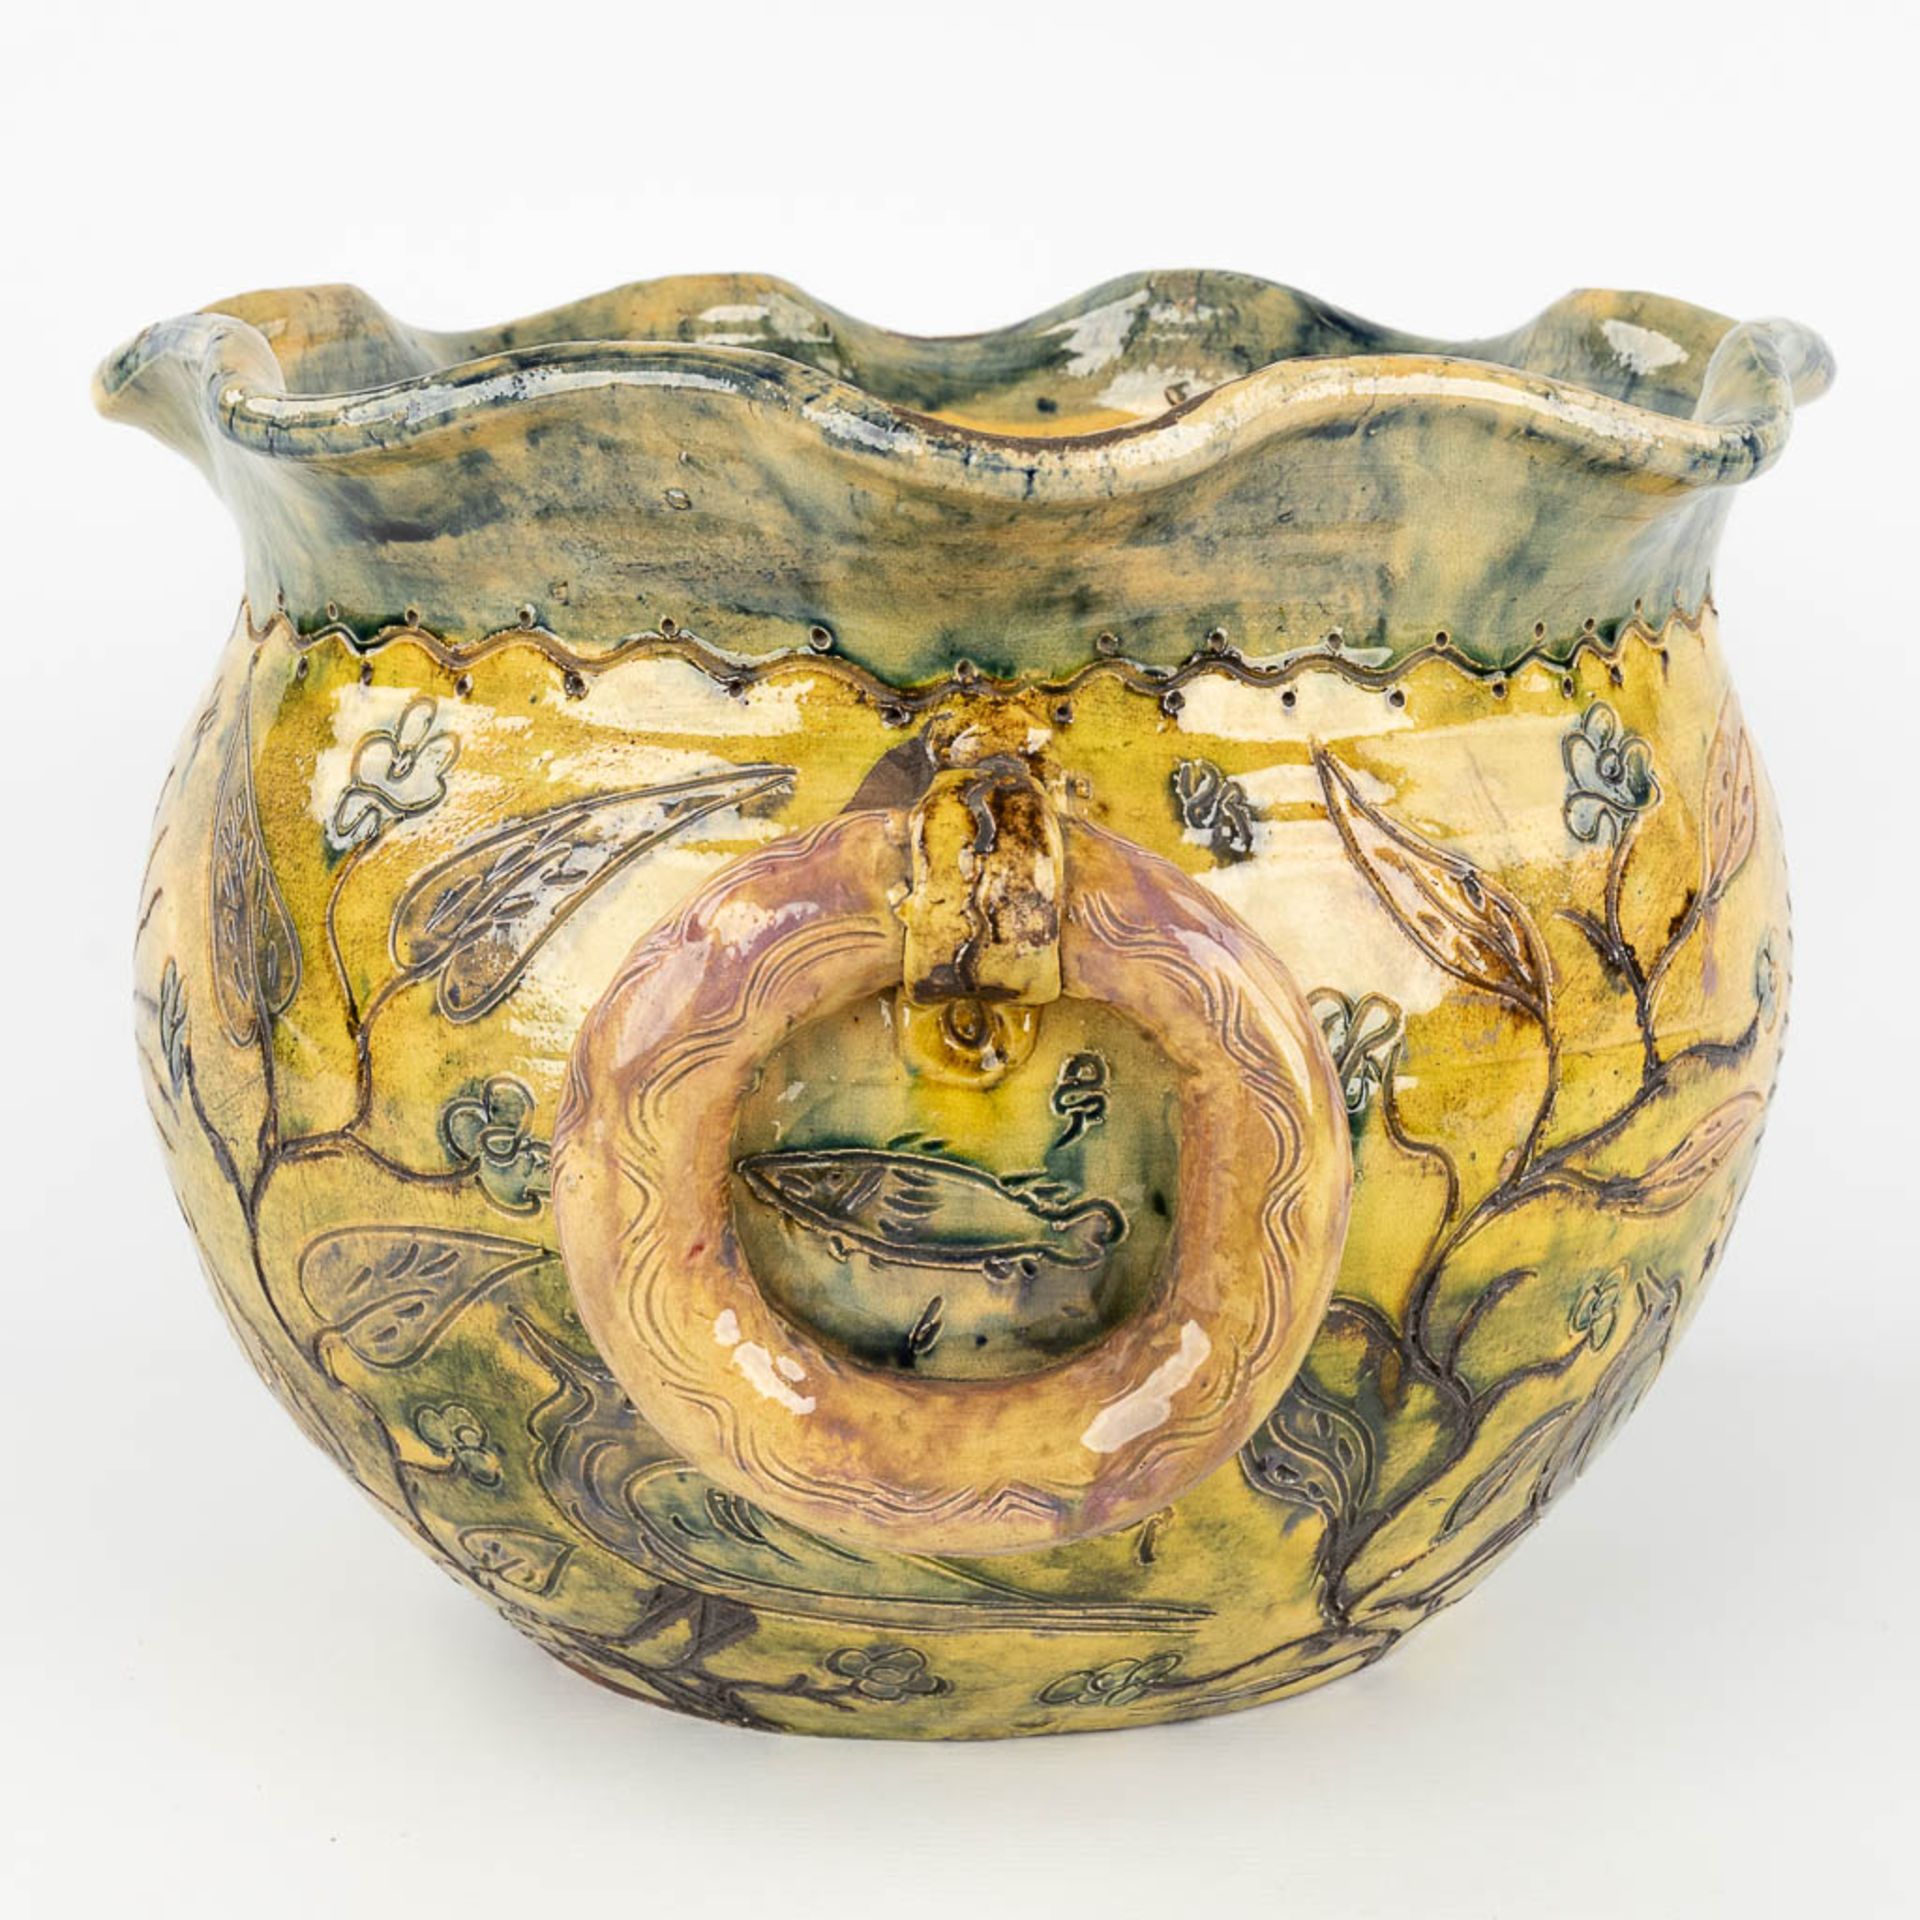 A Cache pot made of Flemish Earthenware, Bredene. 19th century. (L: 36,5 x W: 40 x H: 28 cm) - Image 6 of 12